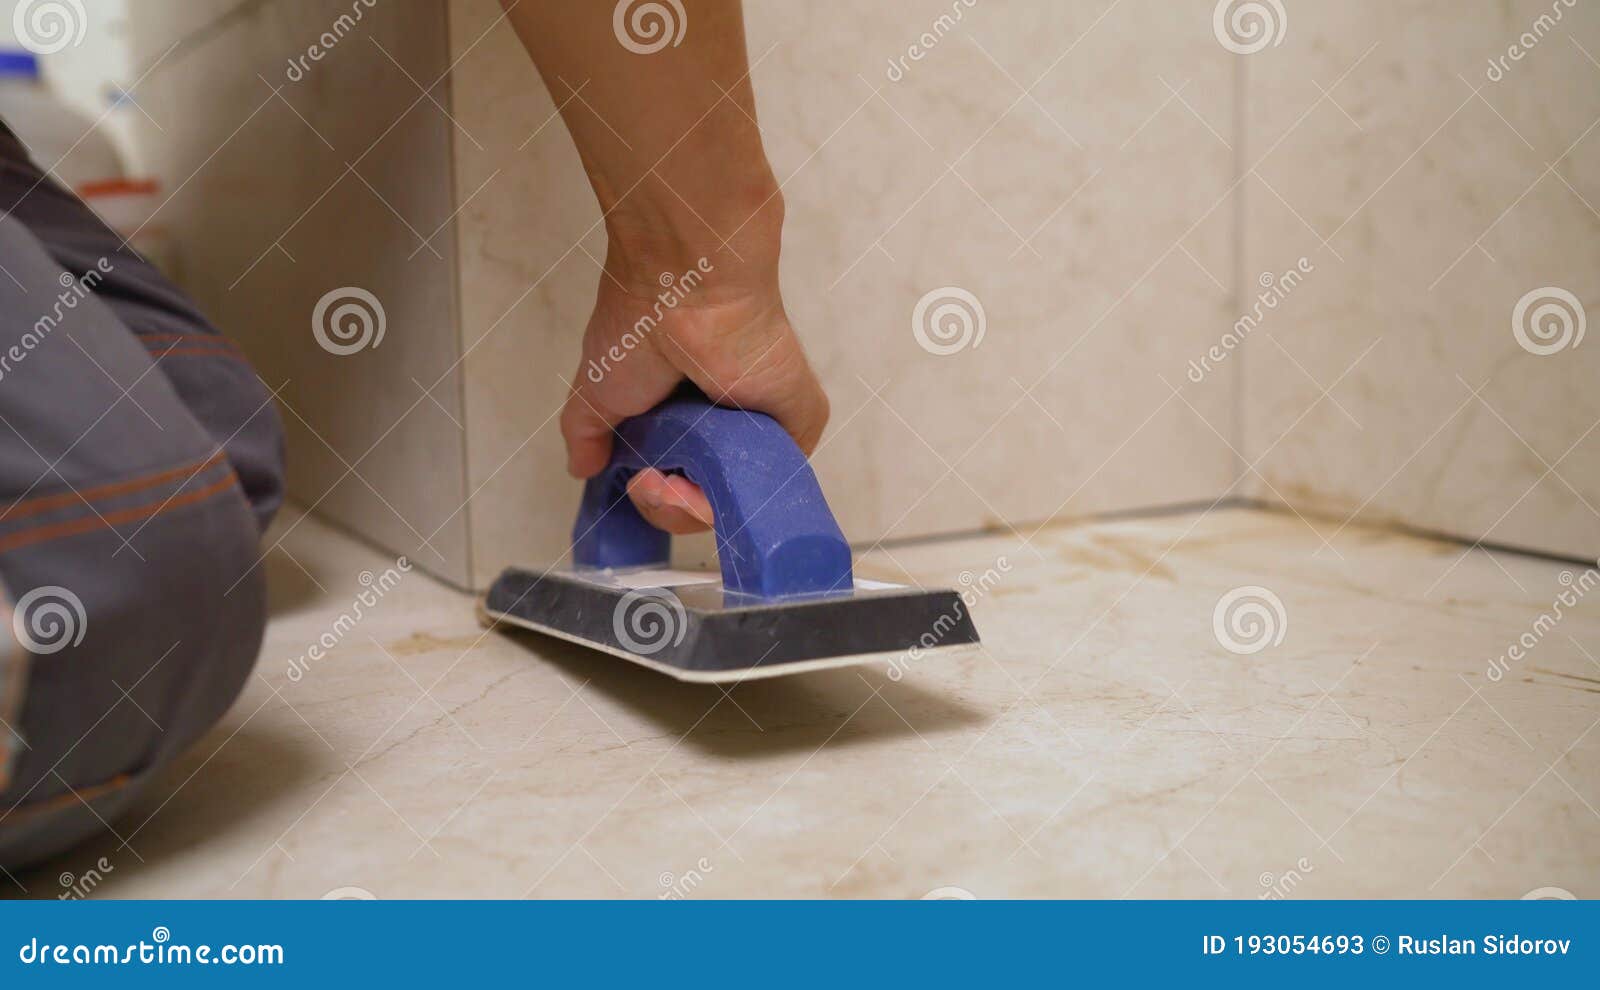 the hand of man holding a rubber float and filling joints with grout. the worker is rubbing the tiles with a float